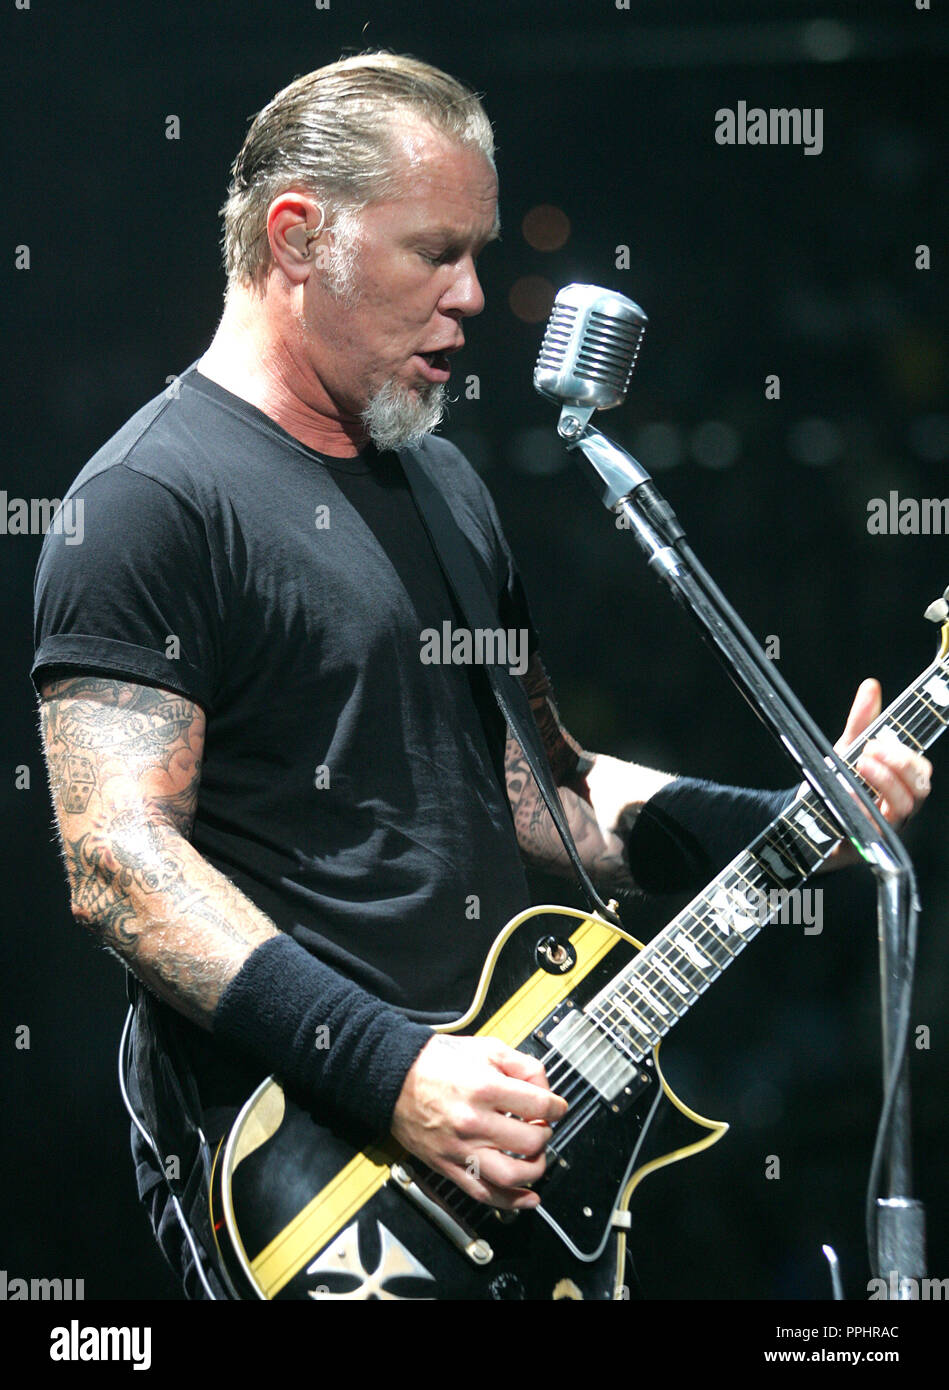 James Hetfield with Metallica performs in concert at the BankAtlantic Center in Sunrise, Florida on October 1, 2009. Stock Photo